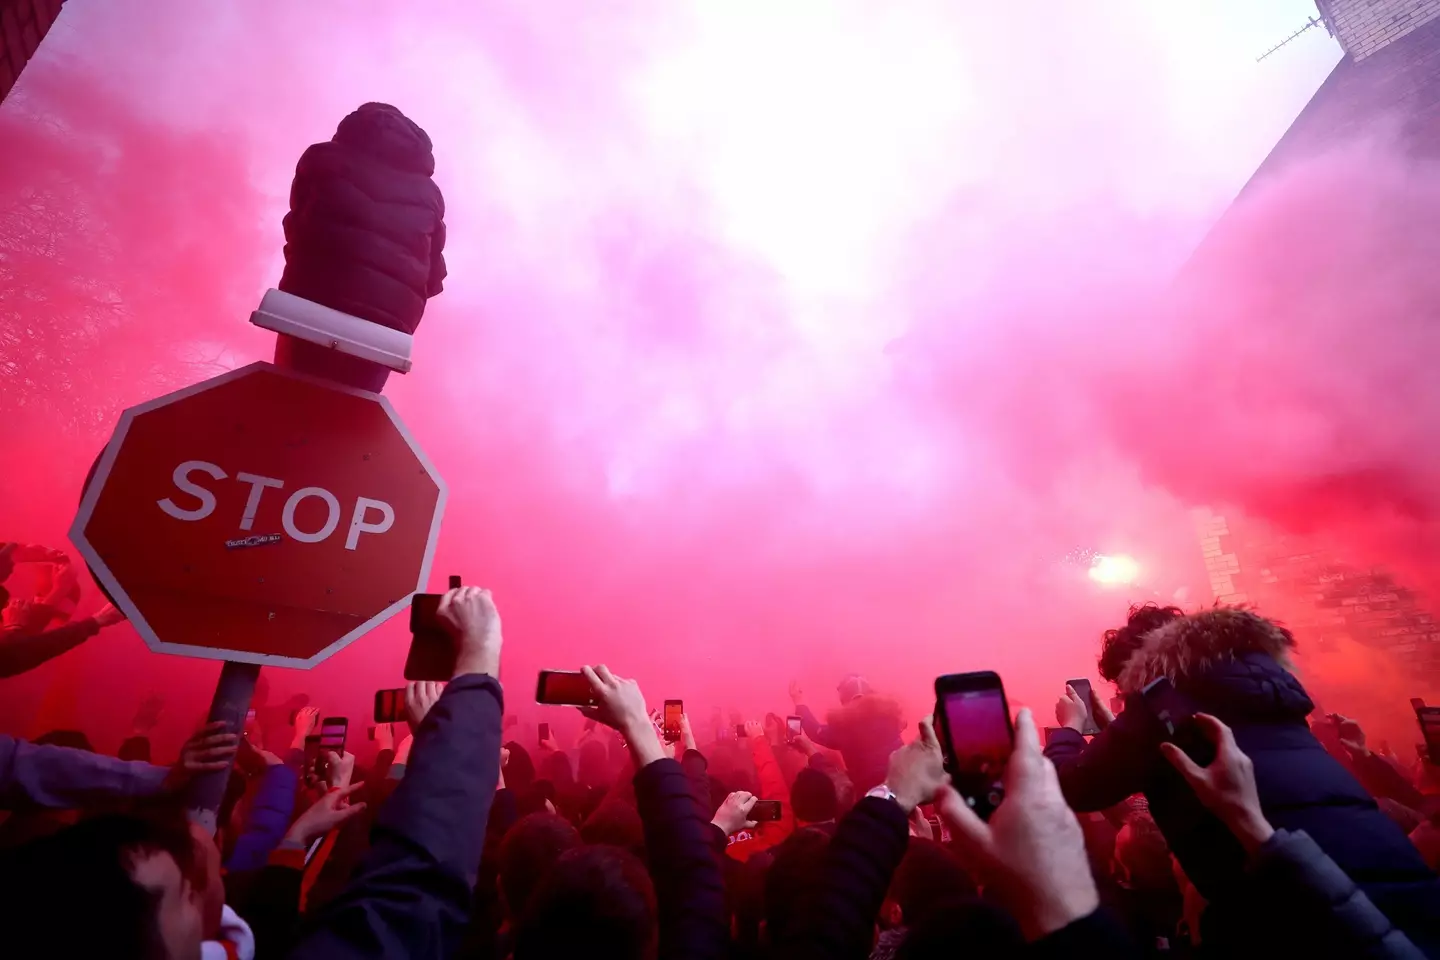 Liverpool fans set off flares as City's coach arrived for a Champions League game. Image: PA Images